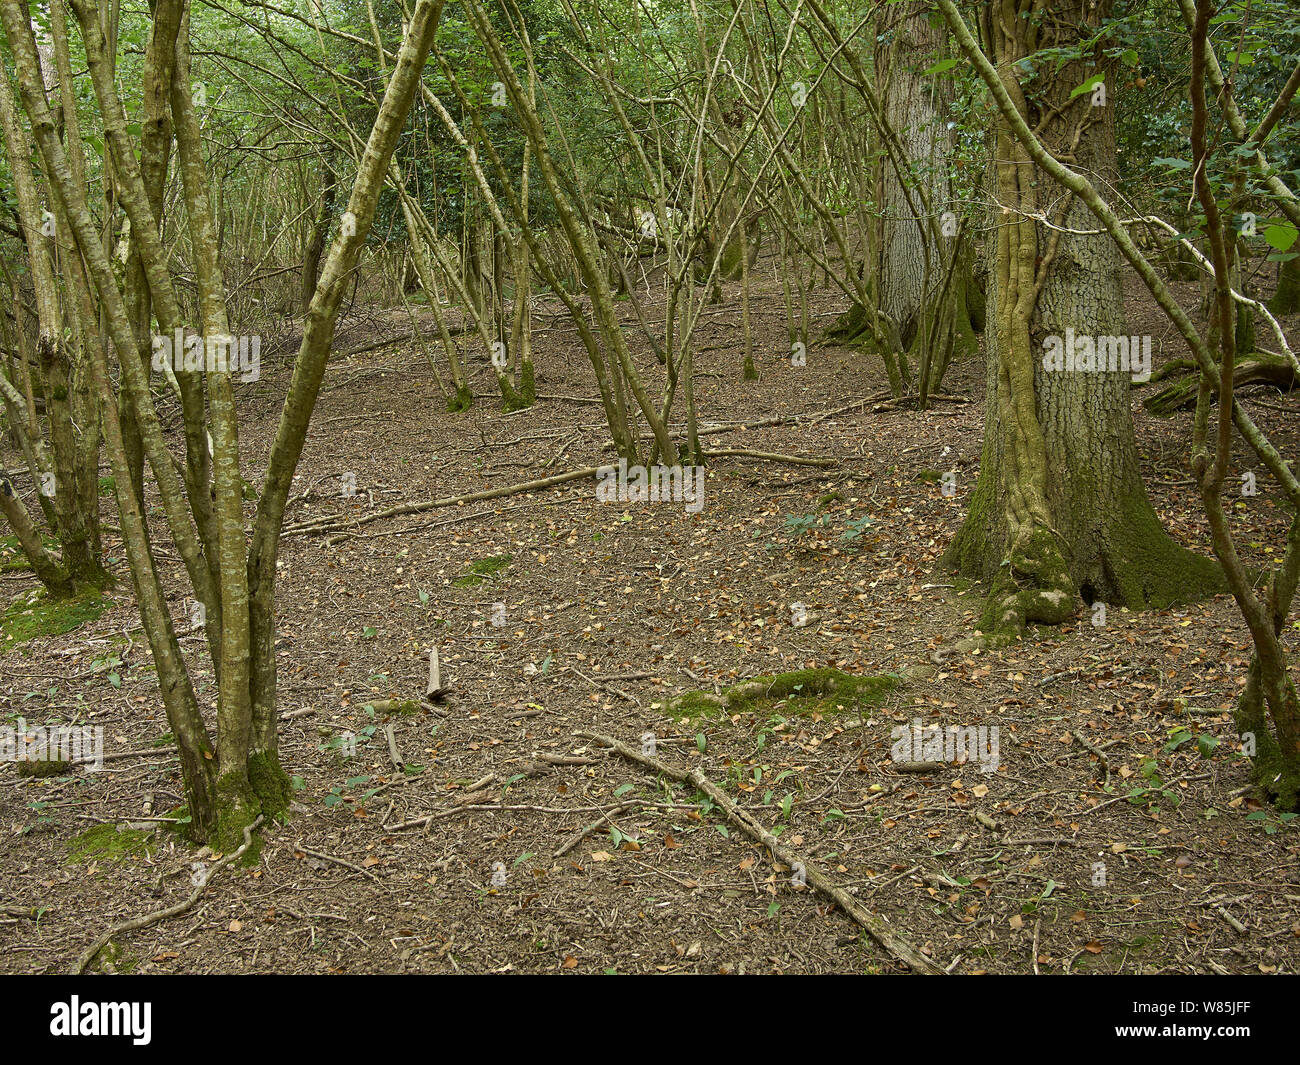 Woodland overgrazed by Fallow deer (Dama dama) see image 1501349 for comparison with deer fenced area. Sussex, England, UK. June. Stock Photo